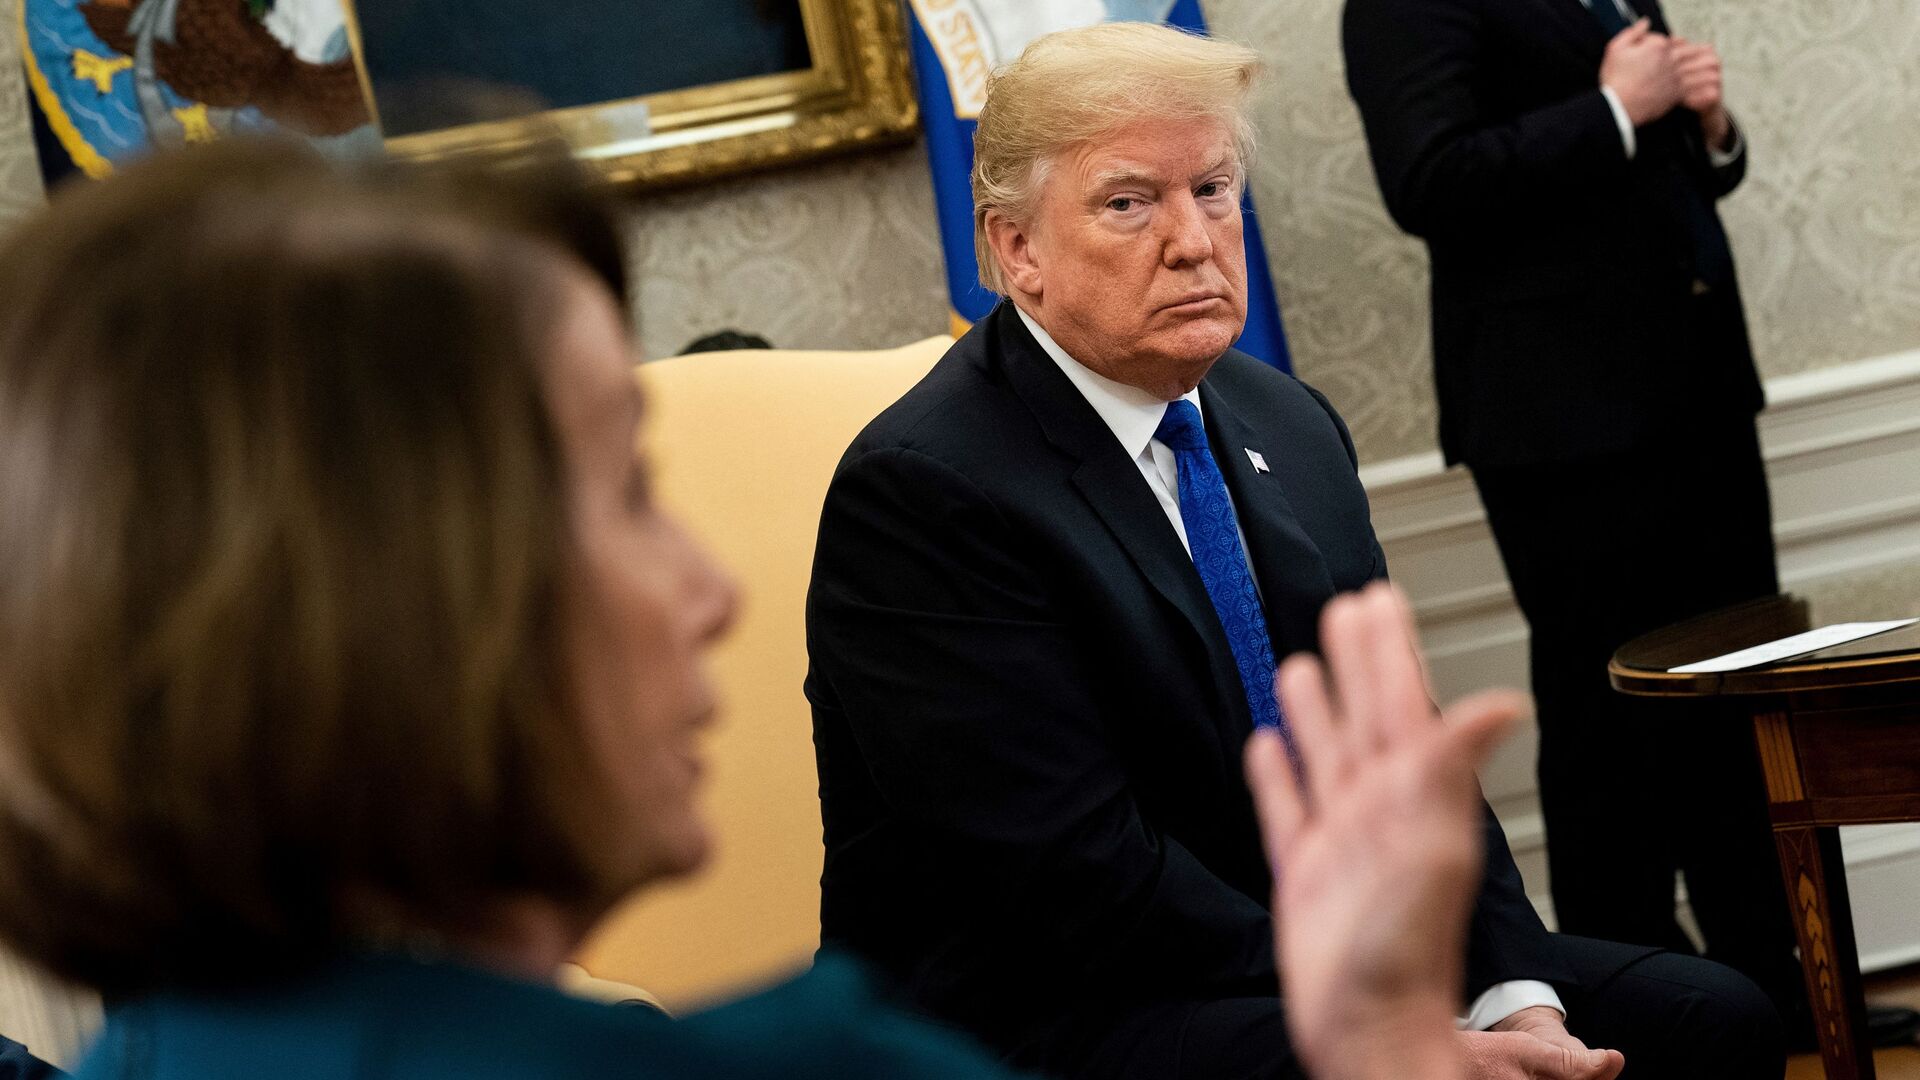 US President Donald Trump (R) listens while presumptive Speaker, House Minority Leader Nancy Pelosi (D-CA) makes a statement to the press before a meeting at the White House December 11, 2018 in Washington, DC - Sputnik International, 1920, 01.08.2022